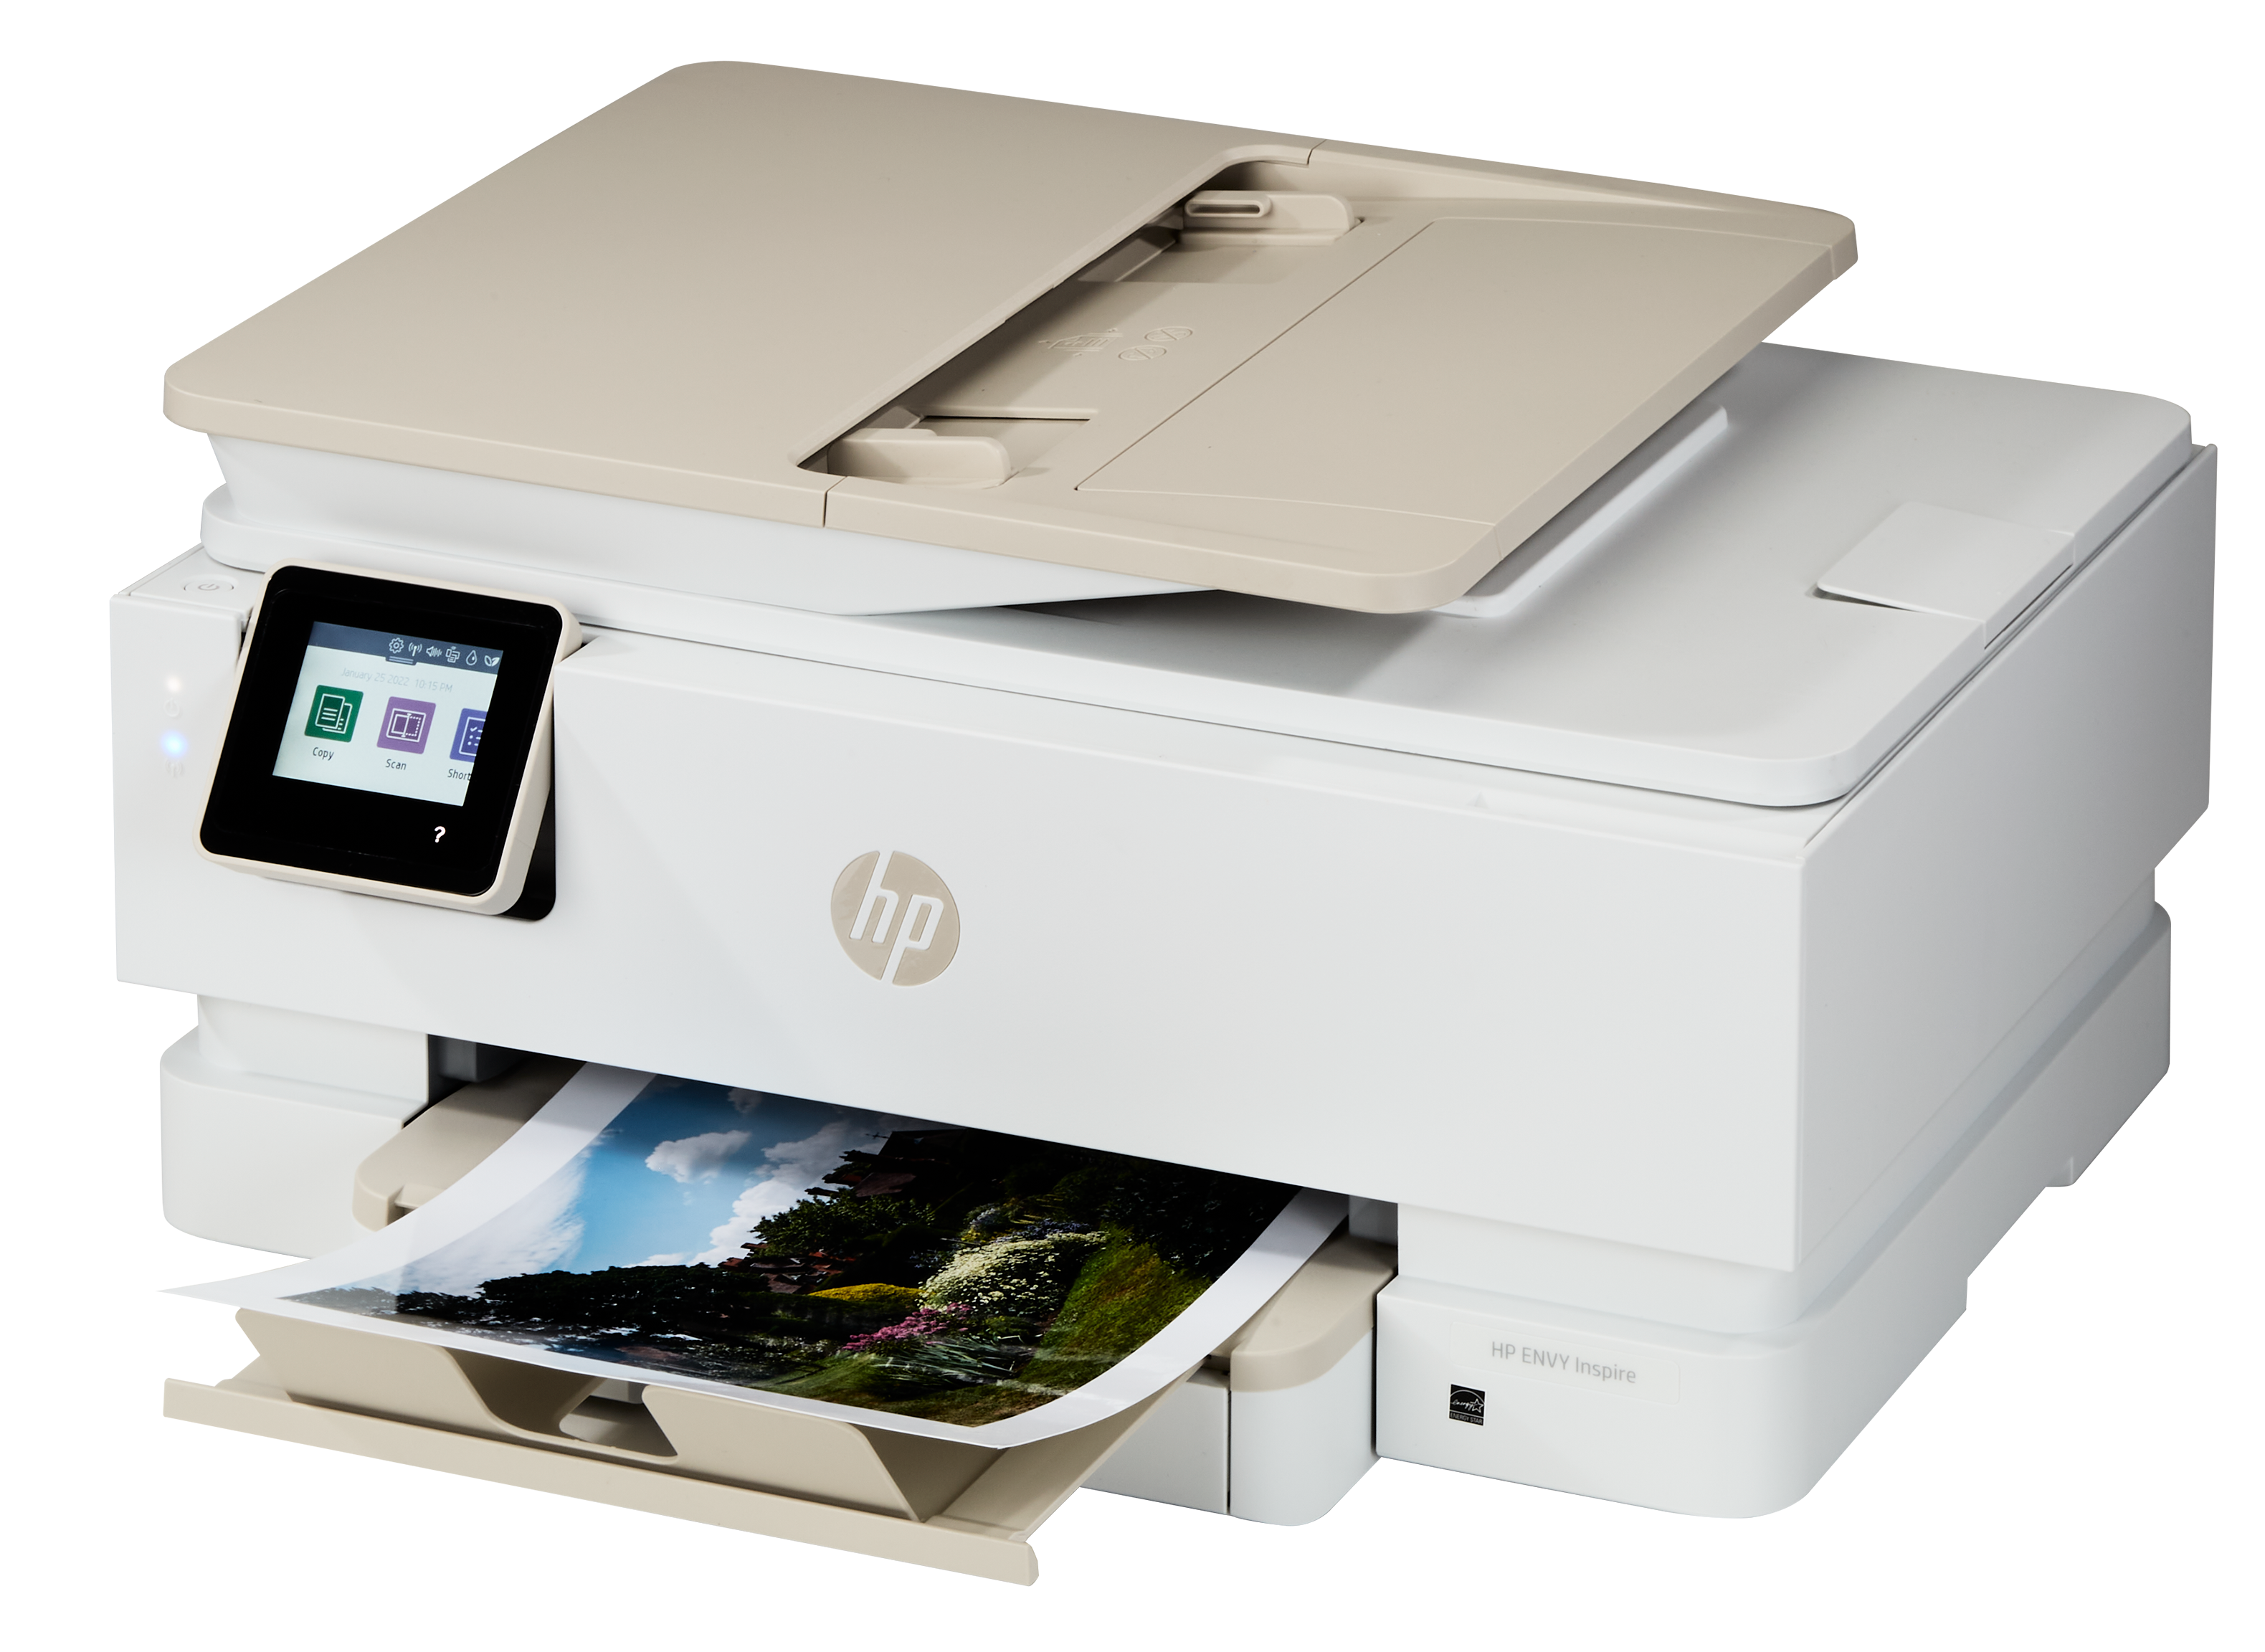 HP Envy Inspire 7955e: A Printer That Meets Your Home Printing Needs -  Forbes Vetted